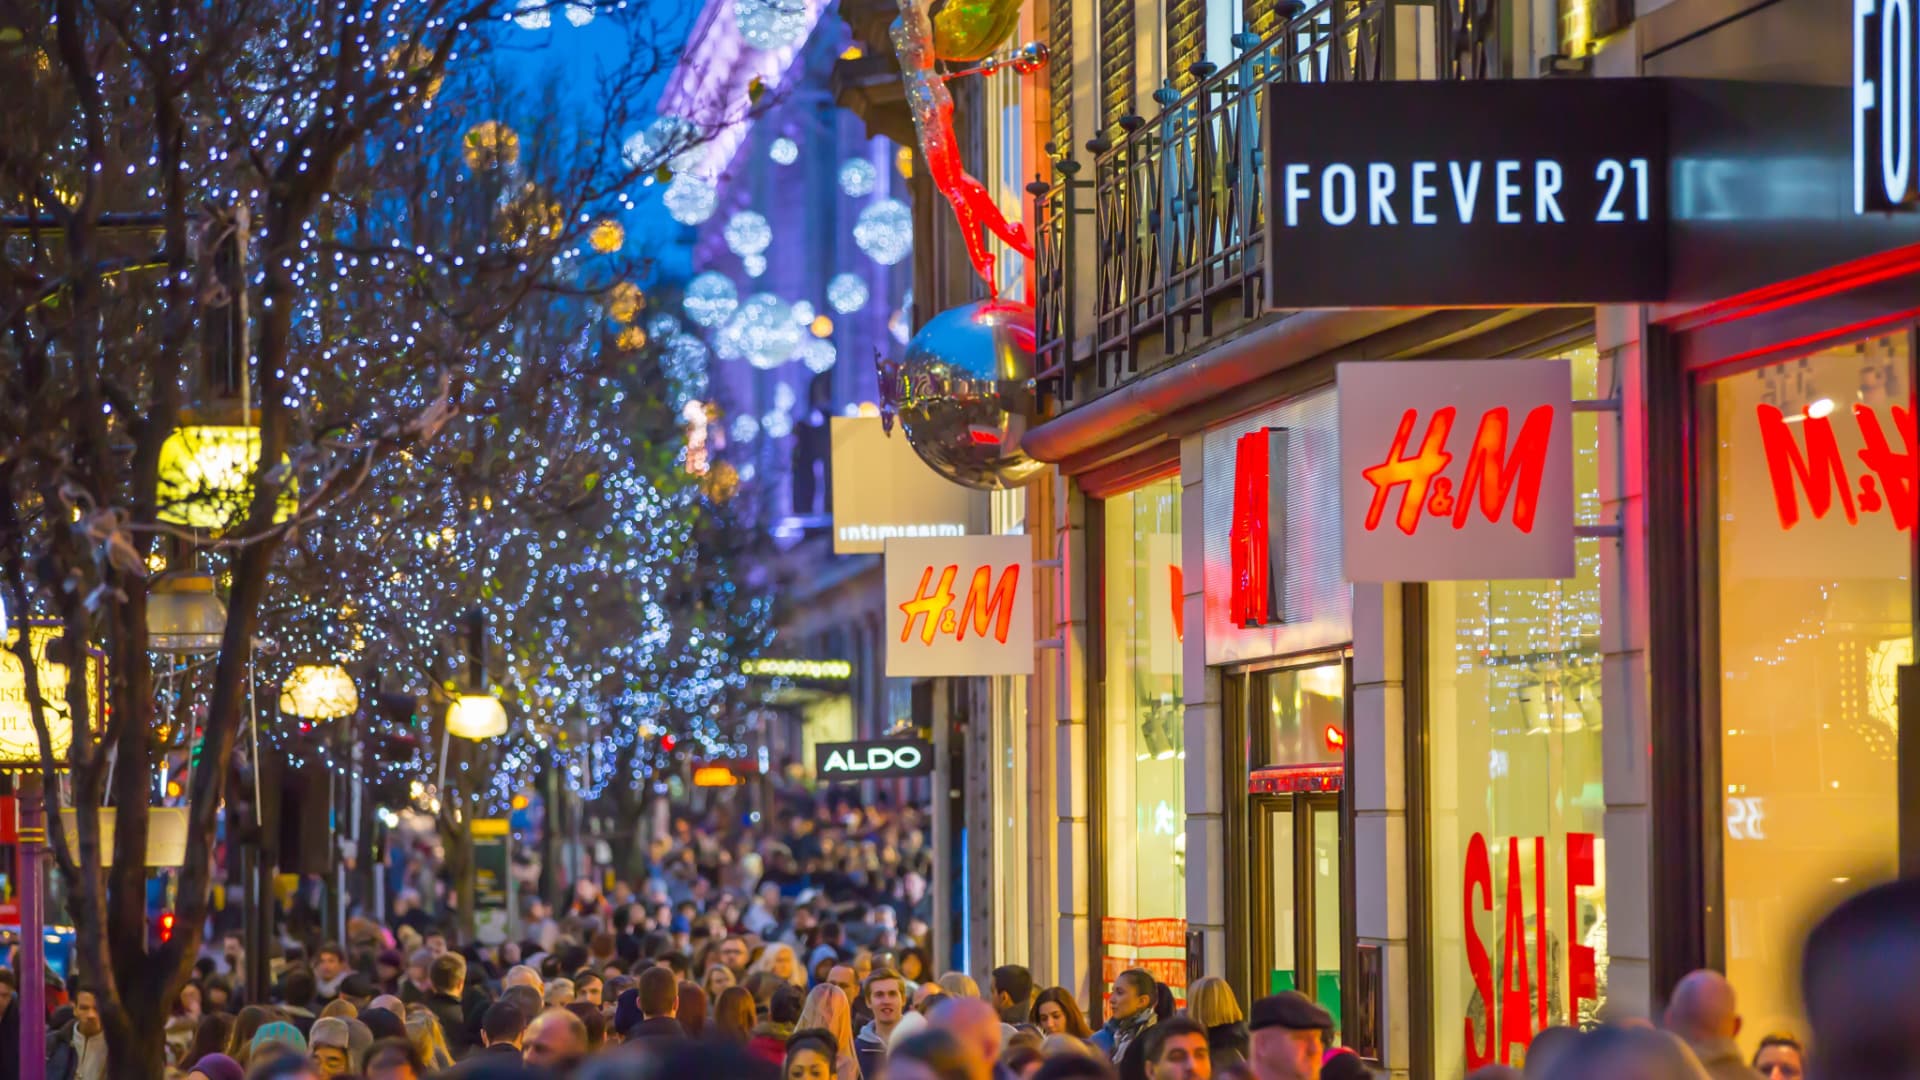 What will have the biggest impact on consumer holiday shopping?